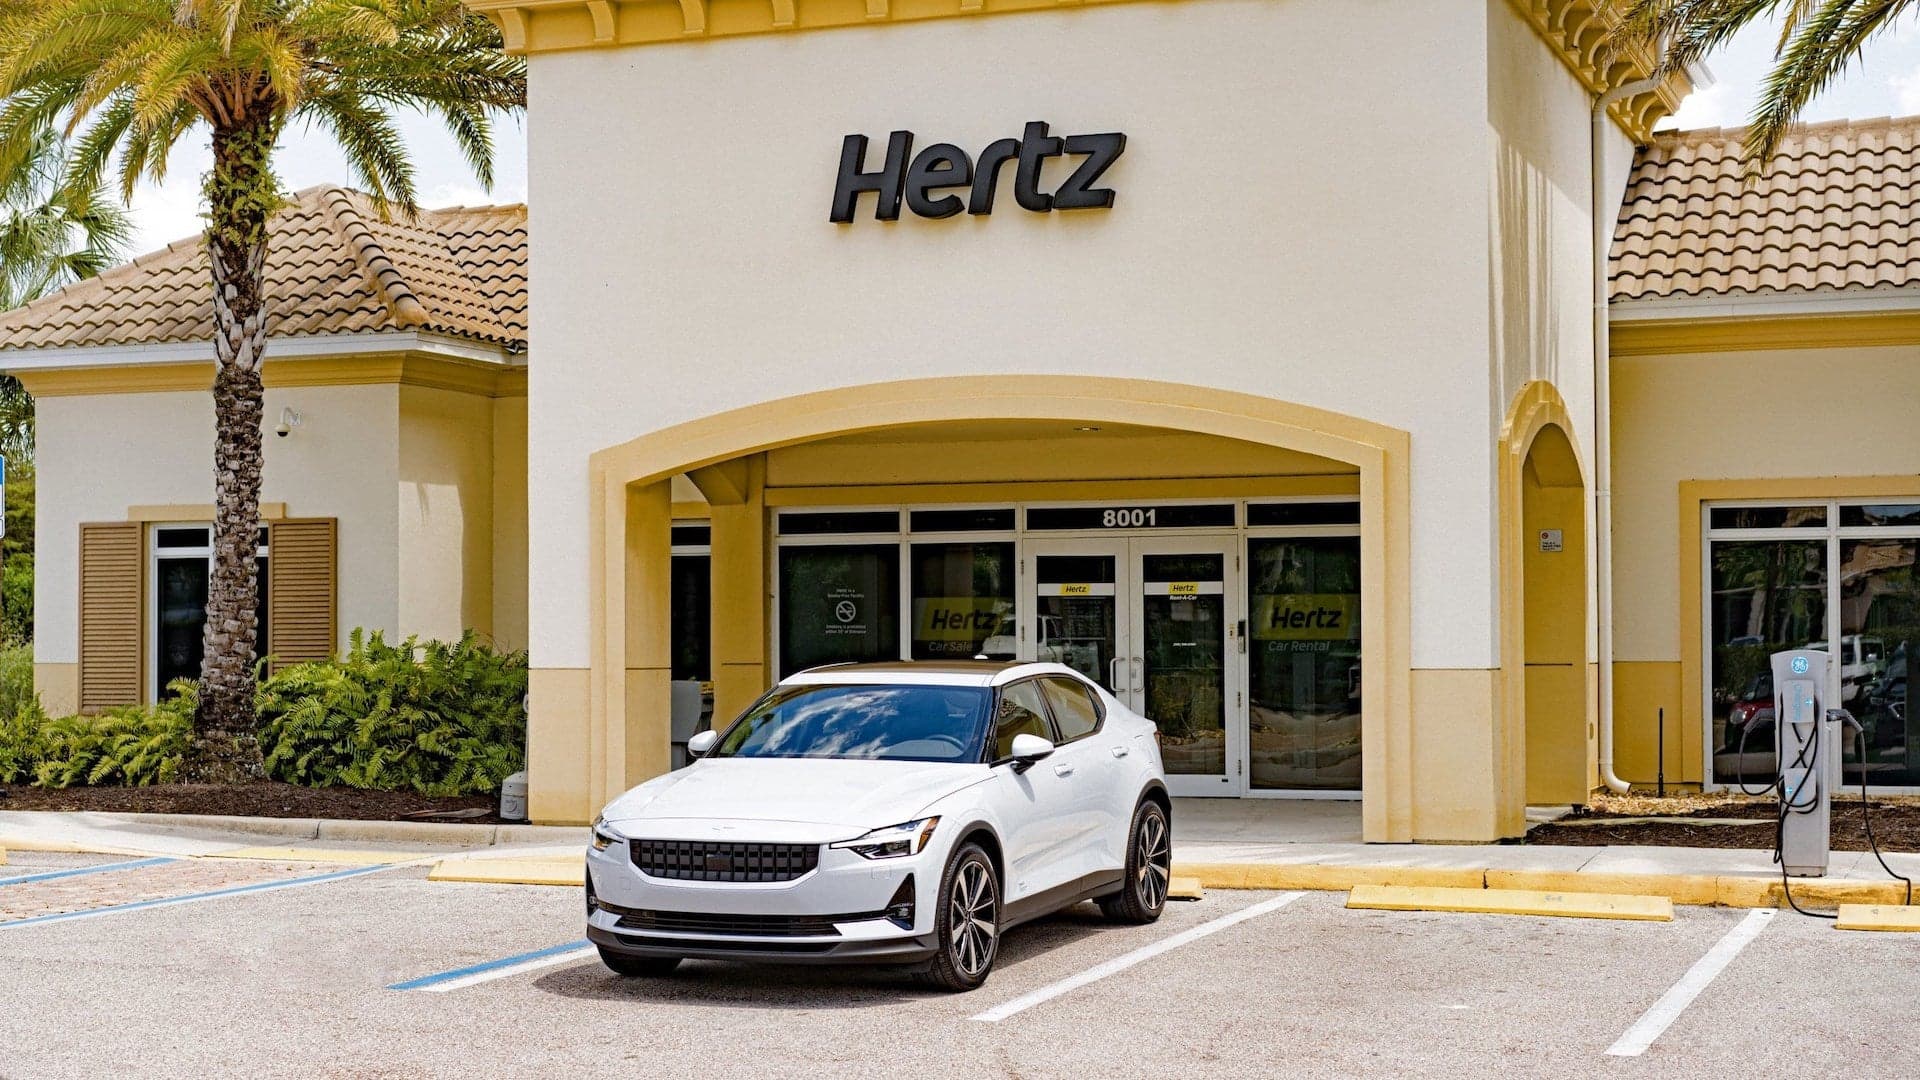 Hertz CEO Admits Customers Have Been Wrongly Arrested Over Stolen Cars